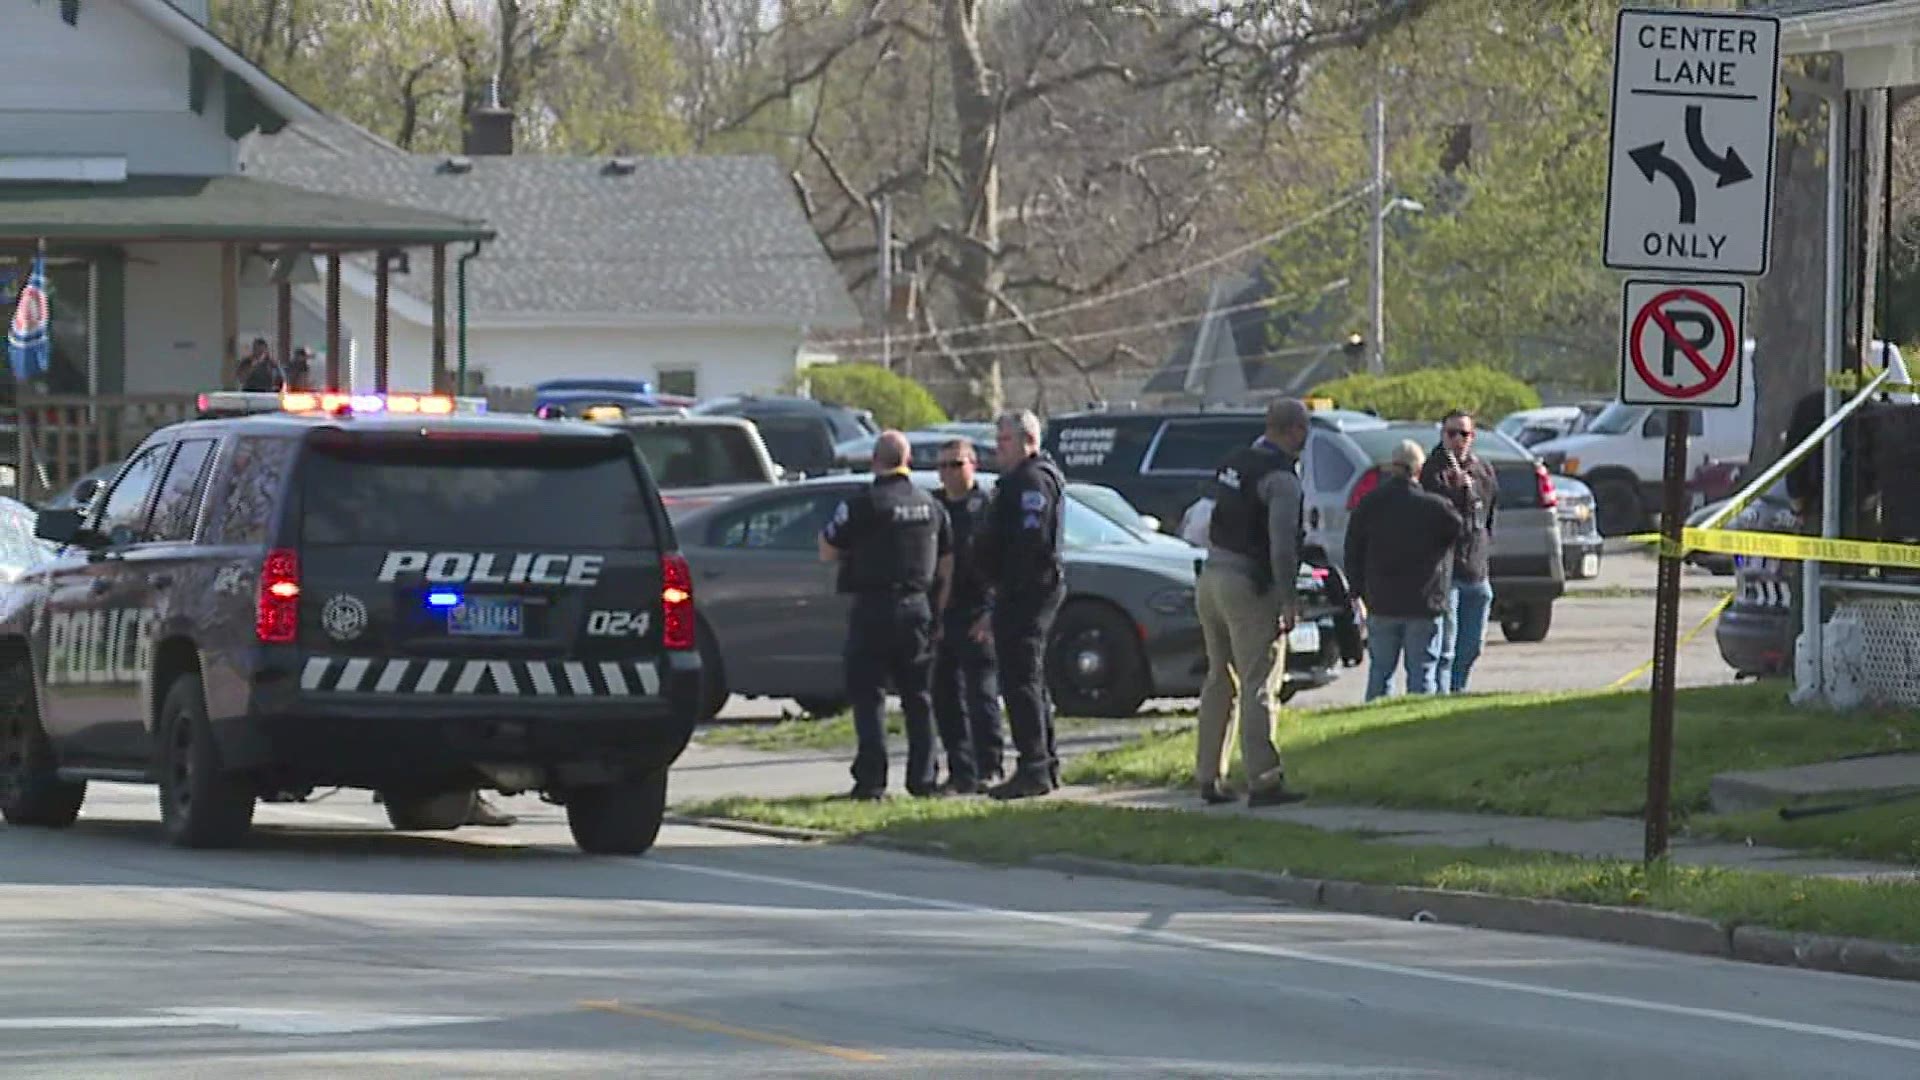 Police confirmed there was a shooting in a residential part of Marquette Street in Davenport Thursday, April 22.